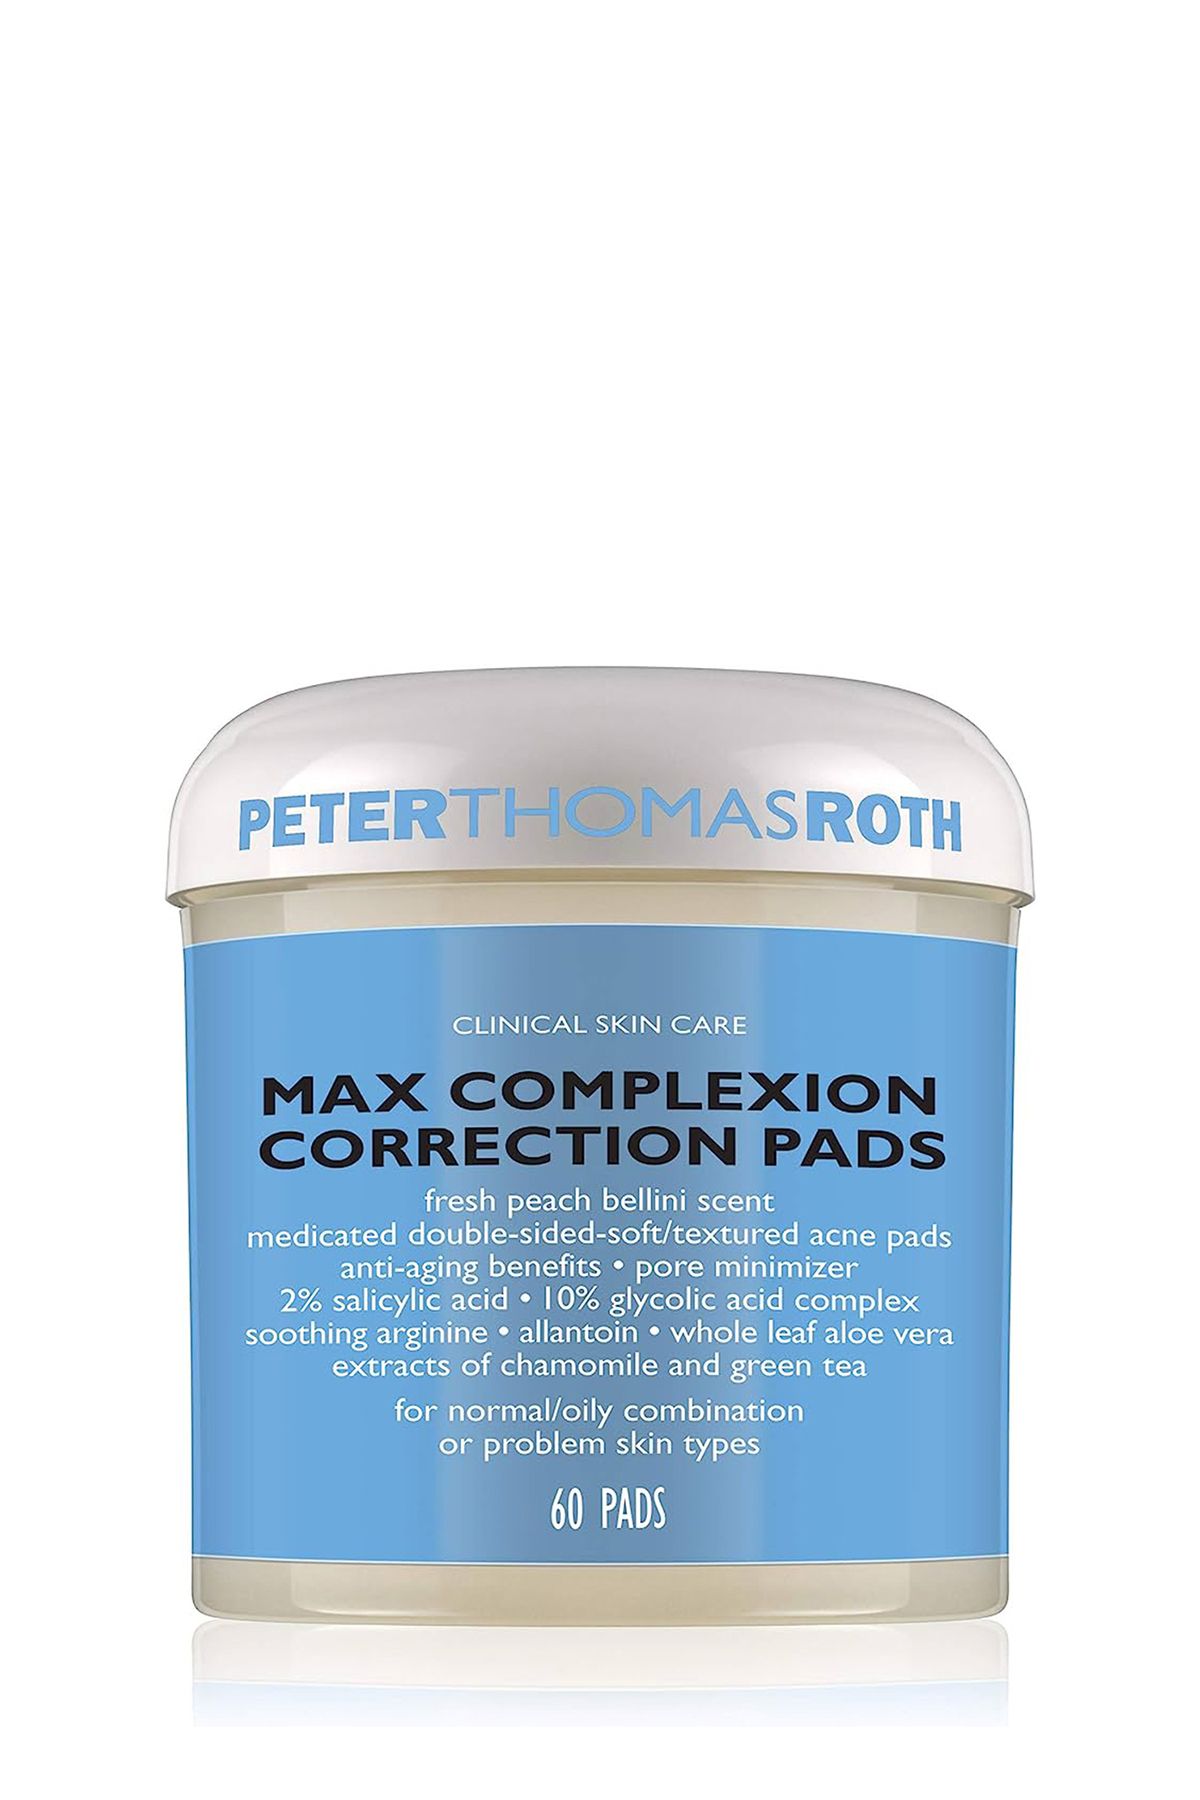 PETER THOMAS ROTH Max Complexion Correction Pads 60 Pads